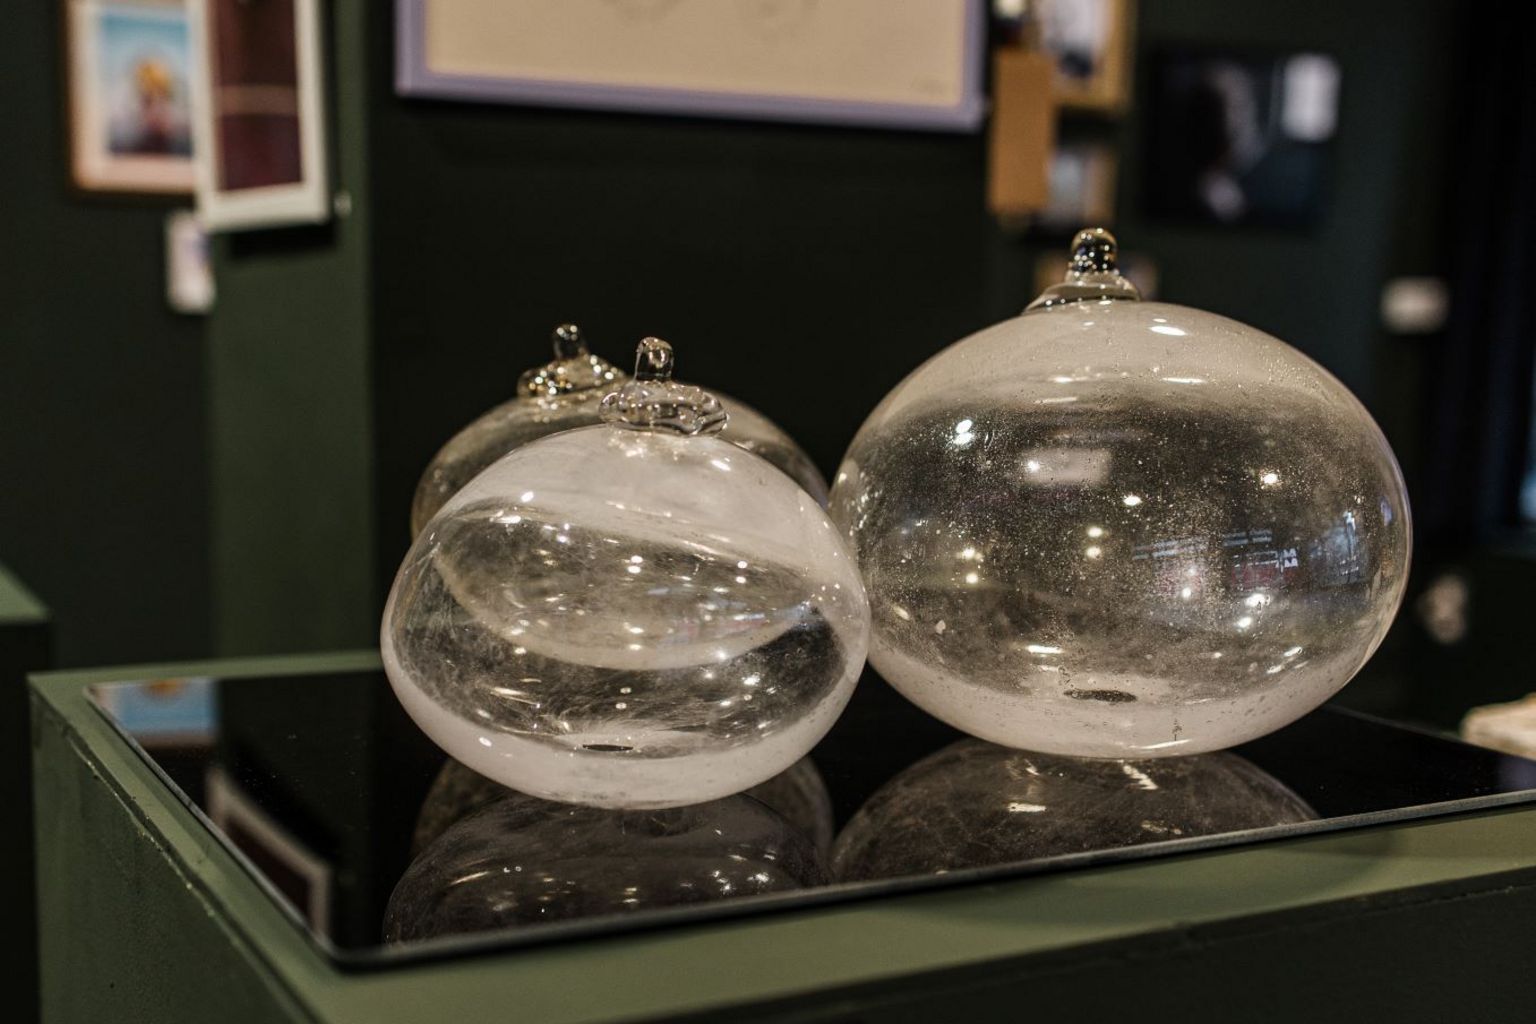 Three large glass representations of human breasts, transparent with a white tinge